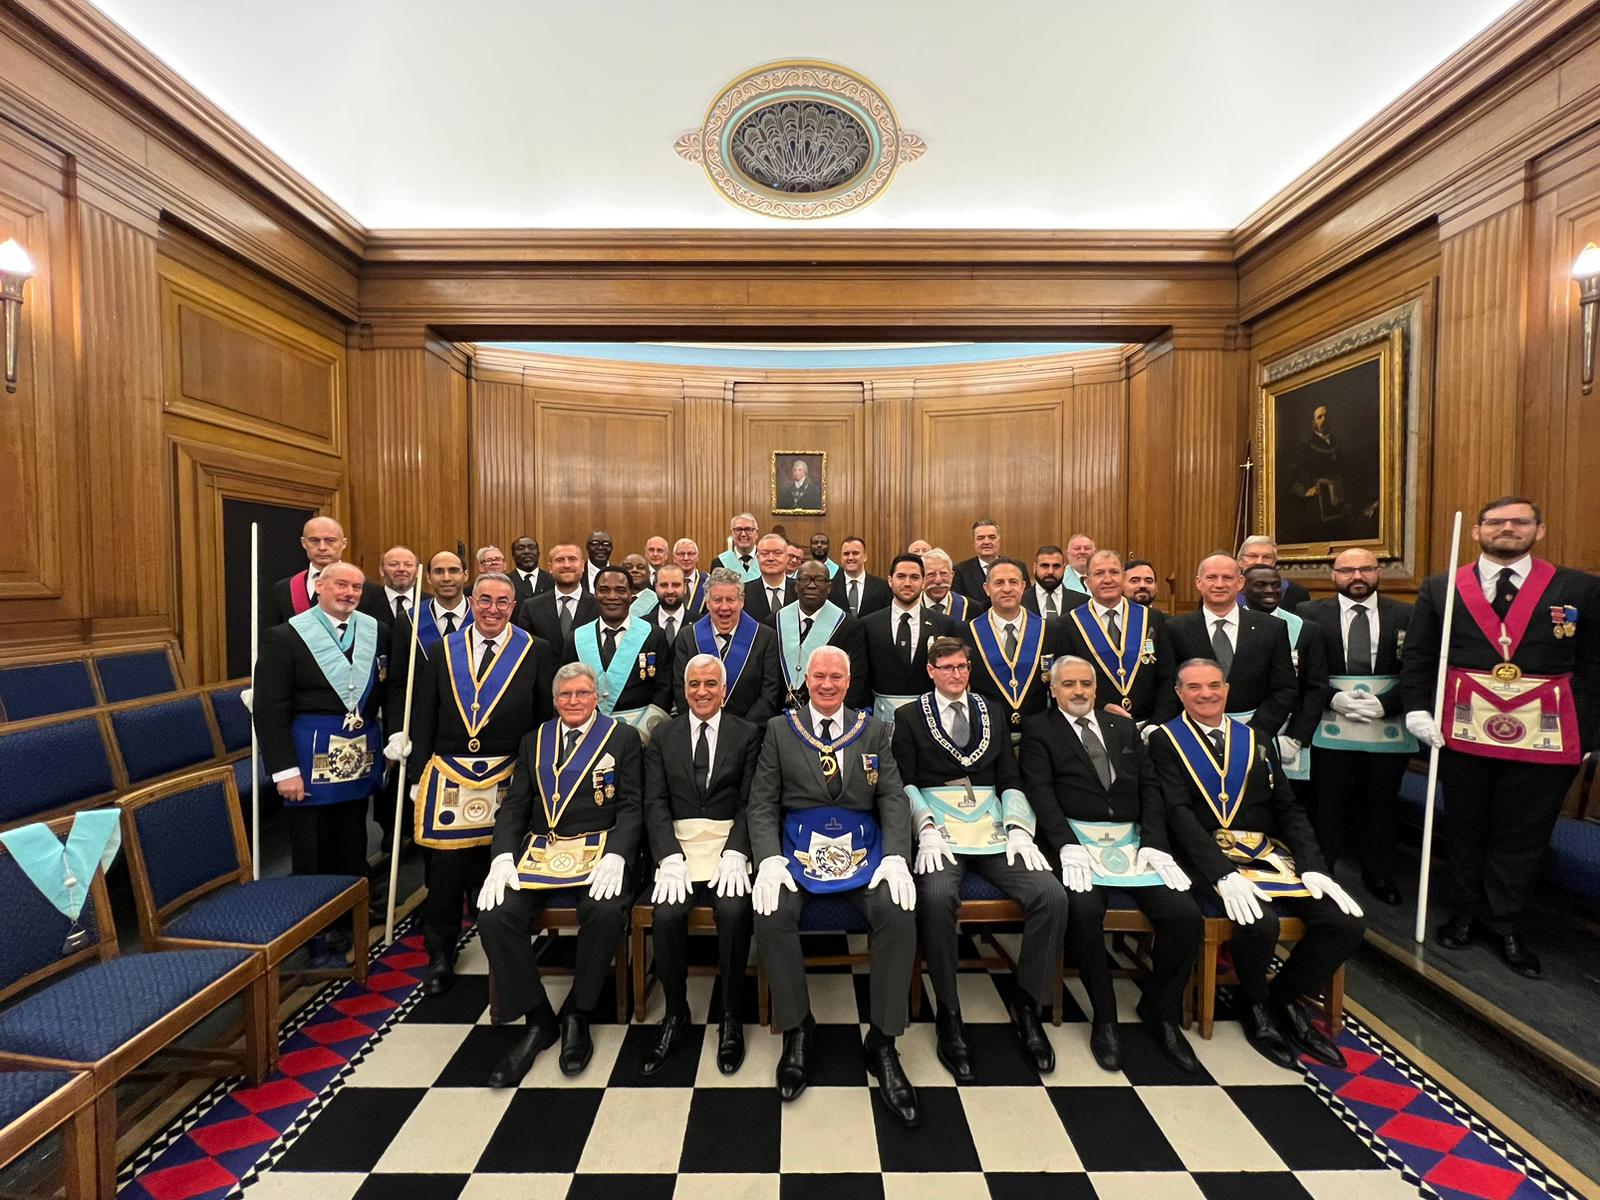 cypriot and London Freemasons